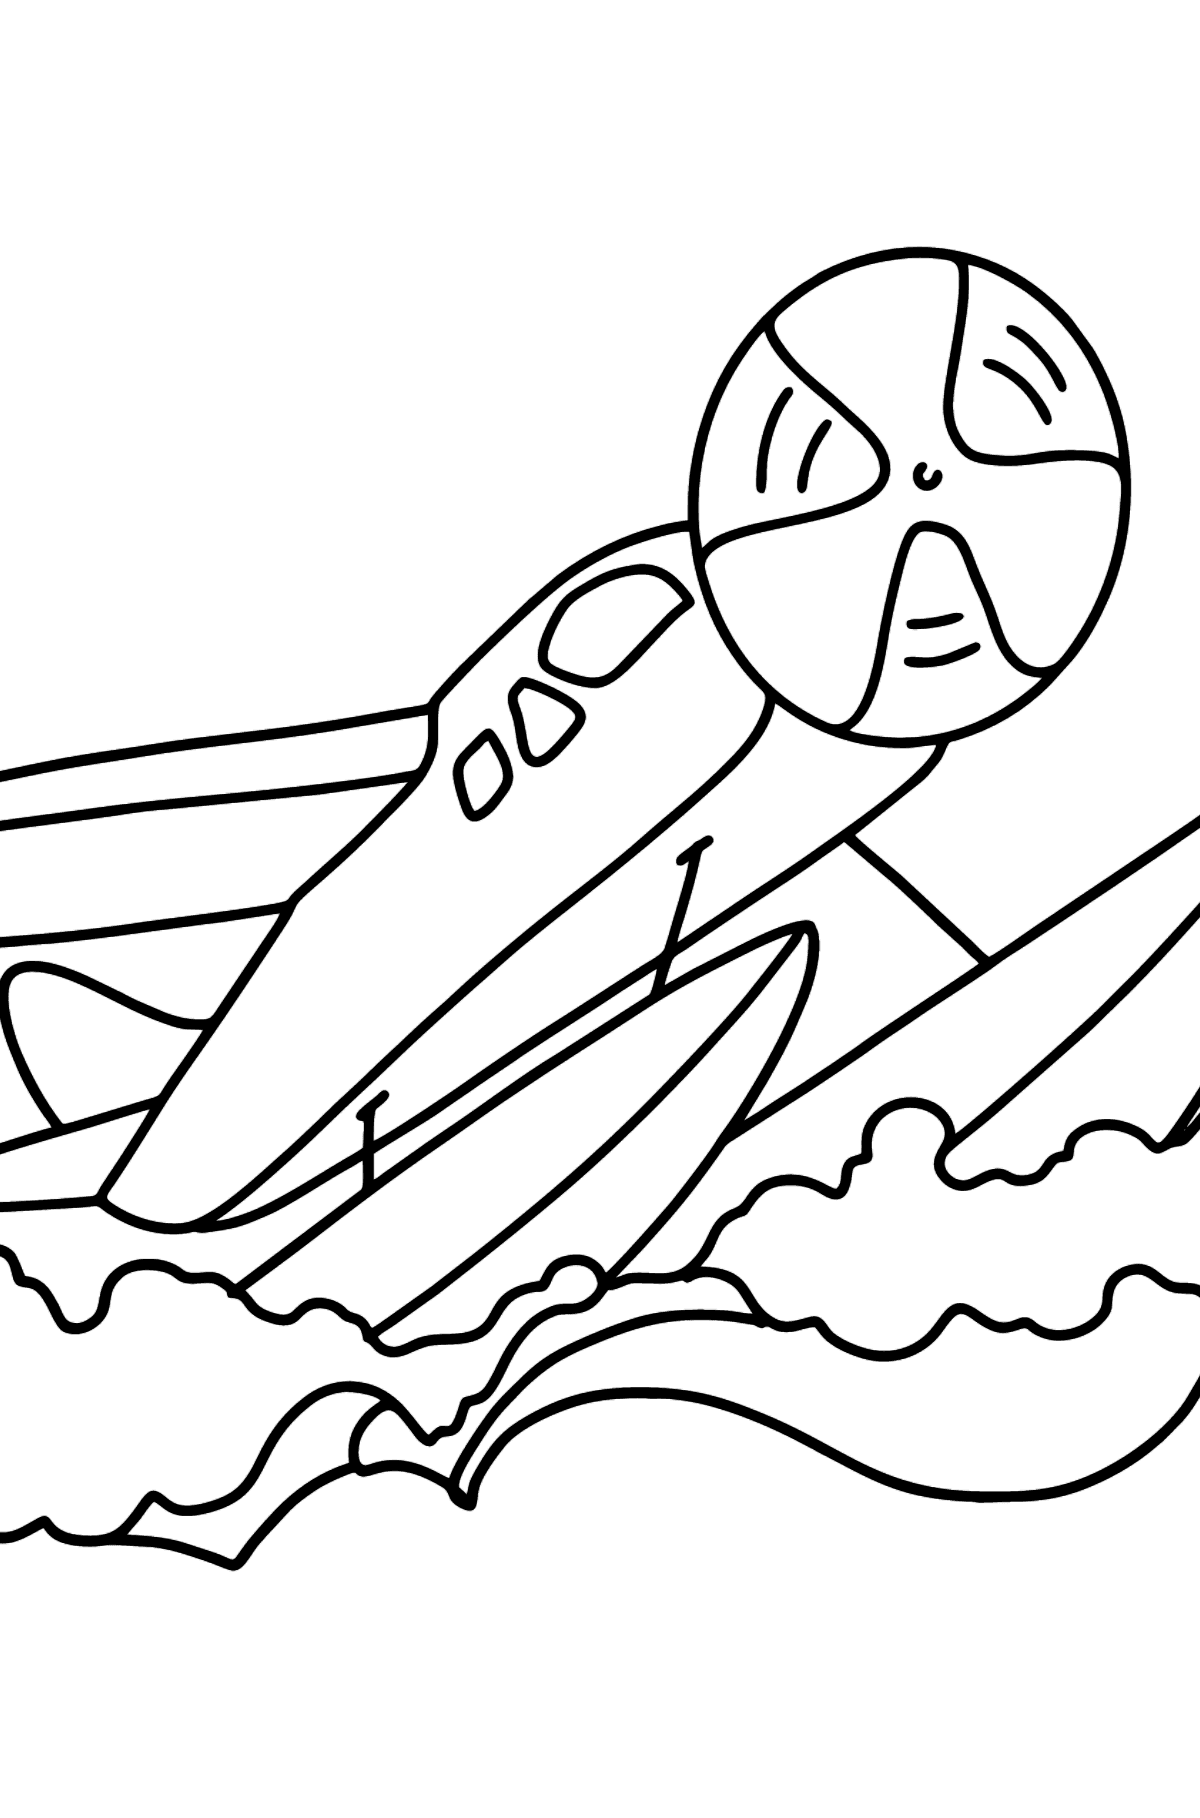 Amphibious Airplane coloring page - Coloring Pages for Kids